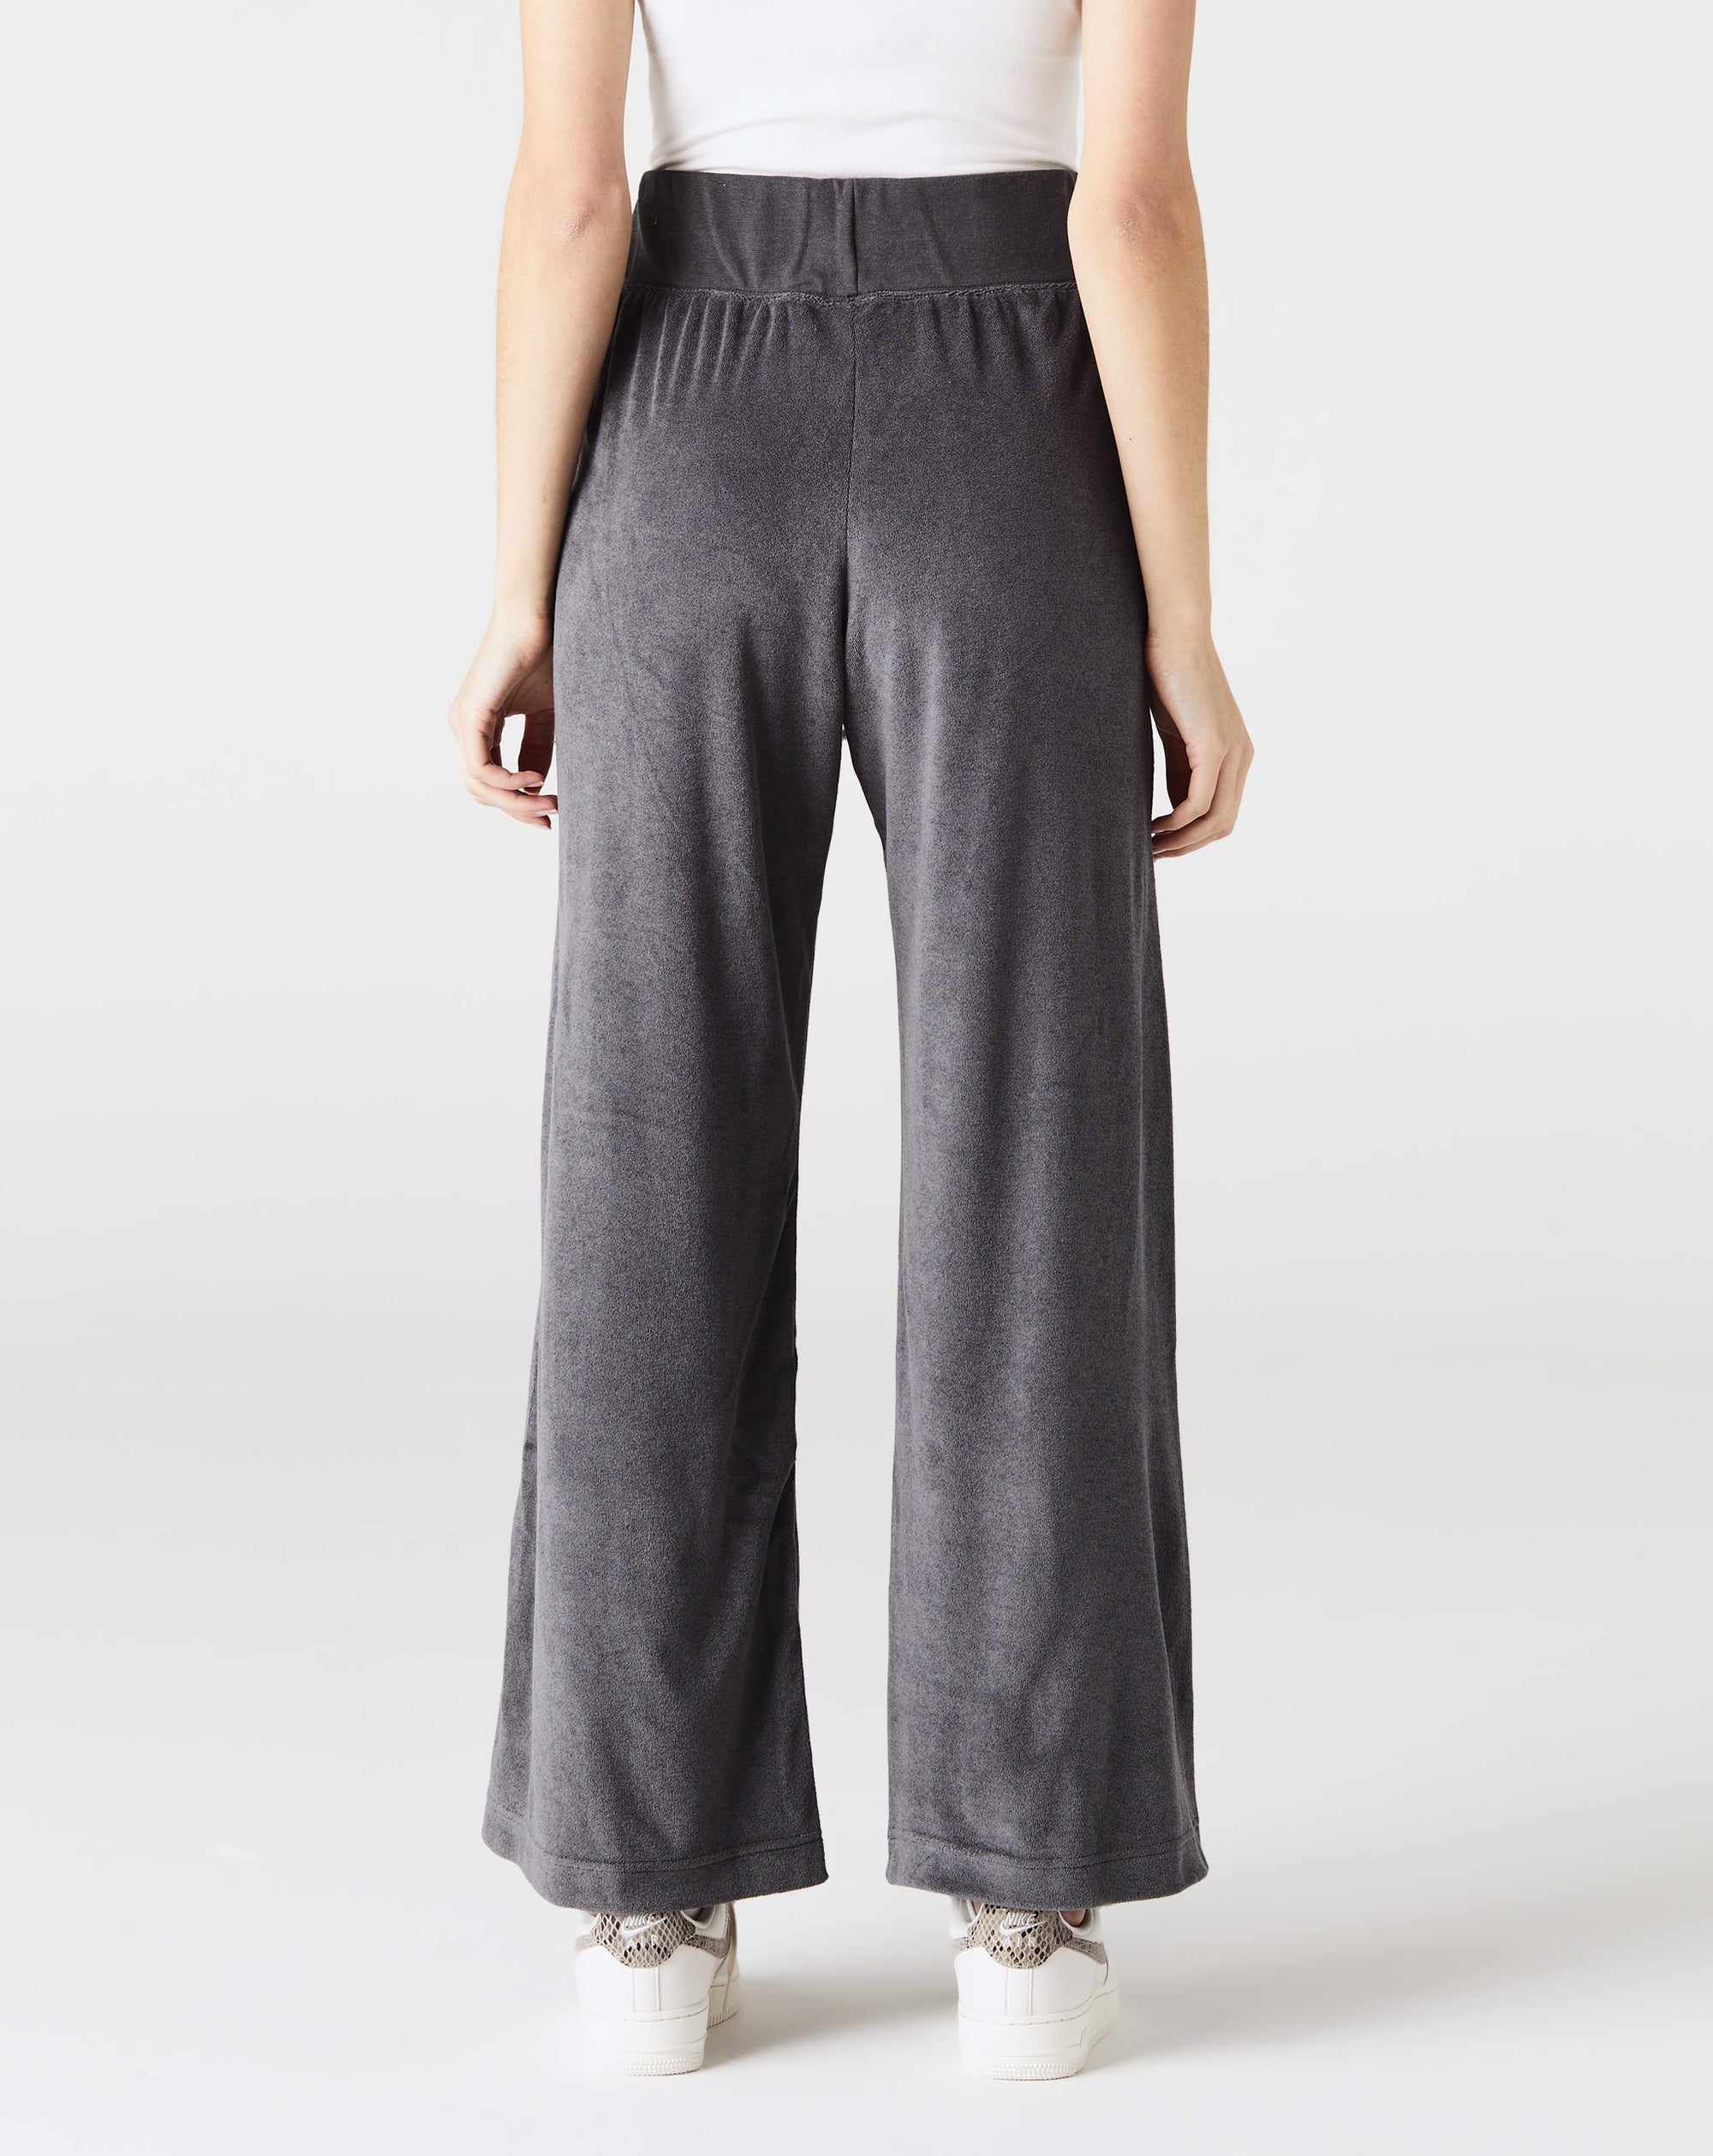 Nike Women's Terry High-Rise Wide Leg Pants - Rule of Next Apparel